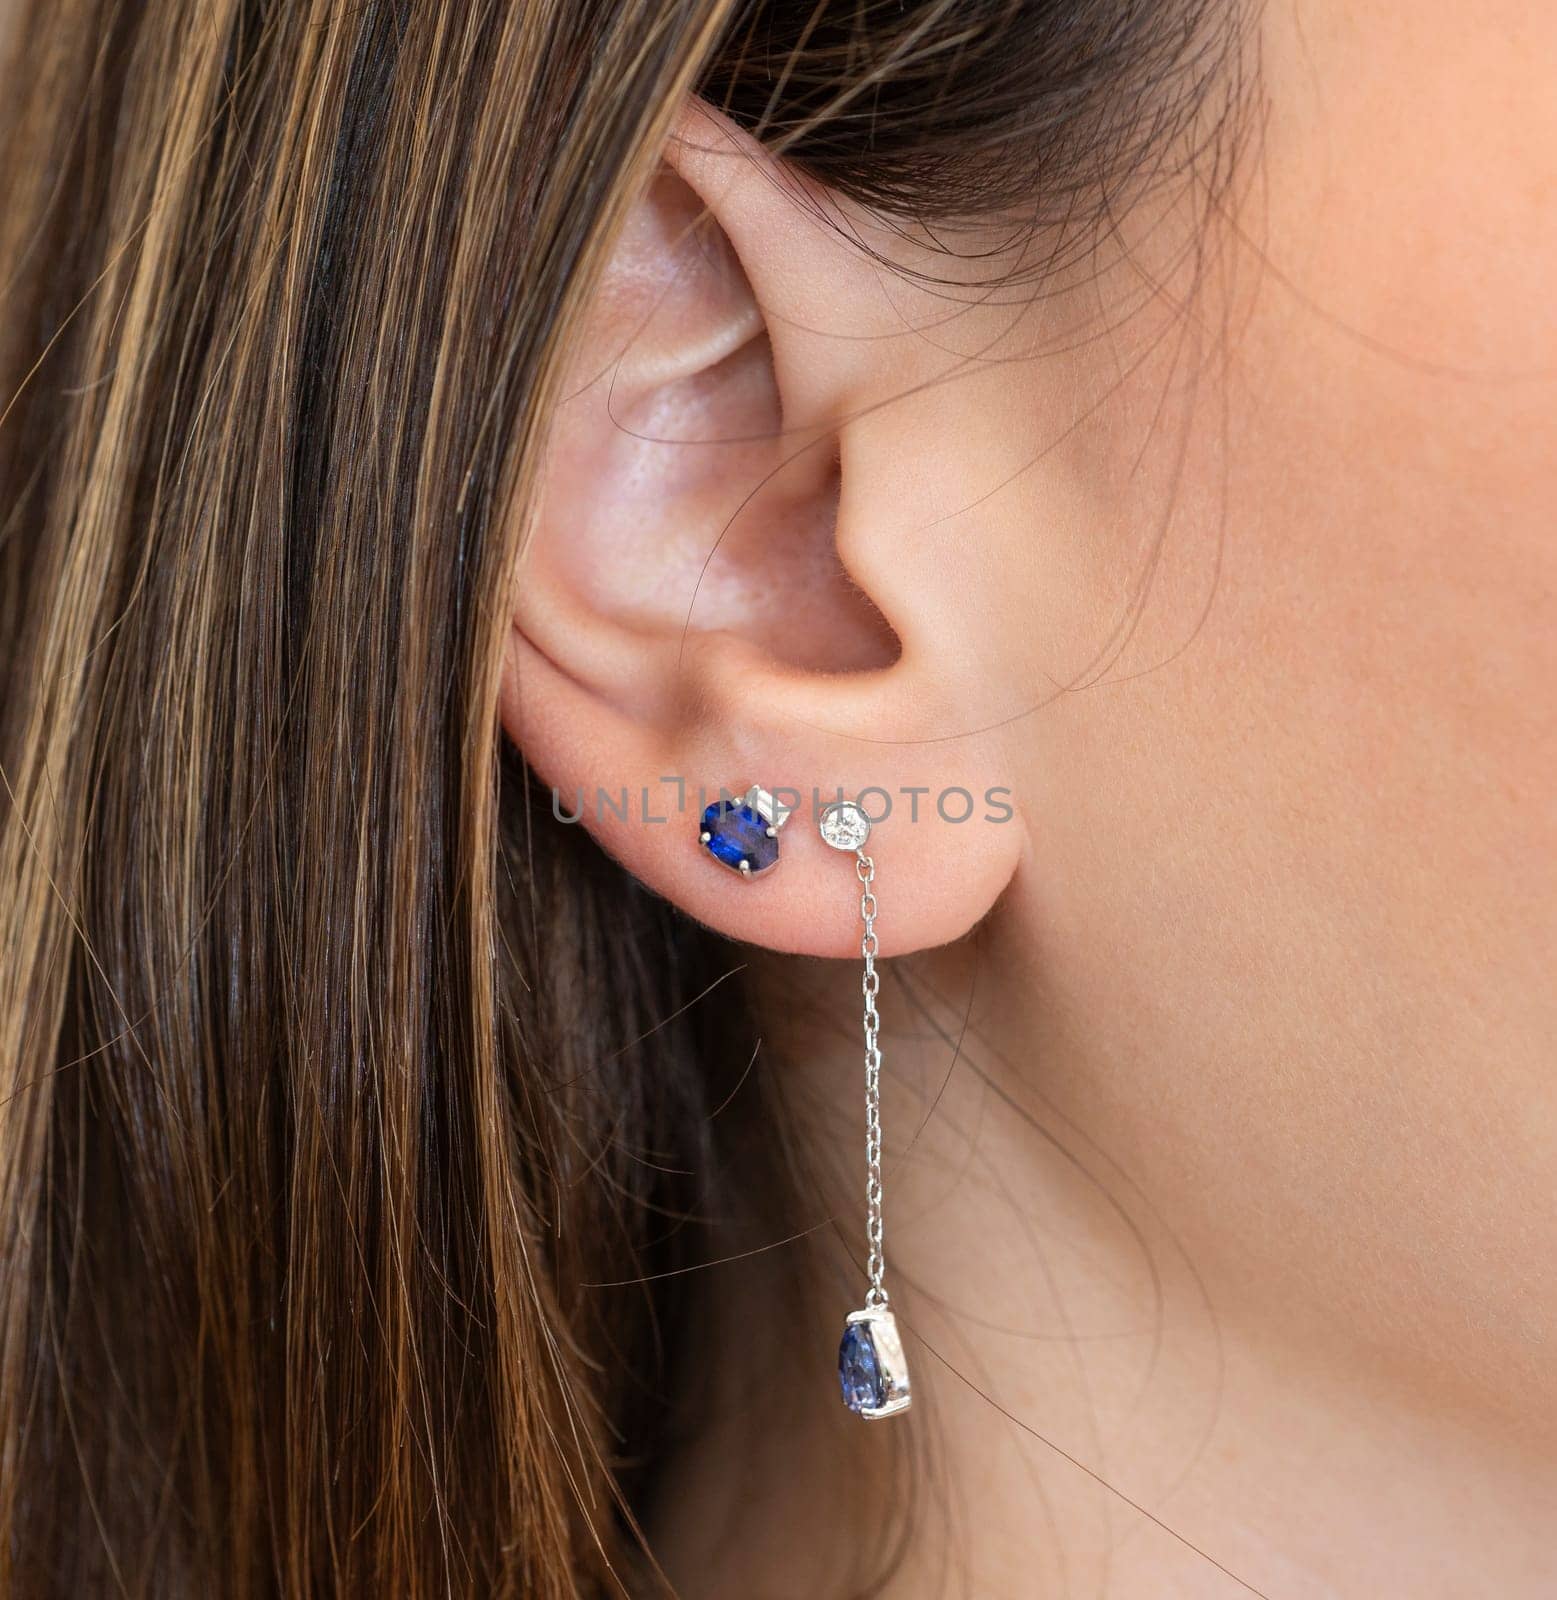 Closeup detail of ladies female ear with luxury expensive earrings and precious gemstones